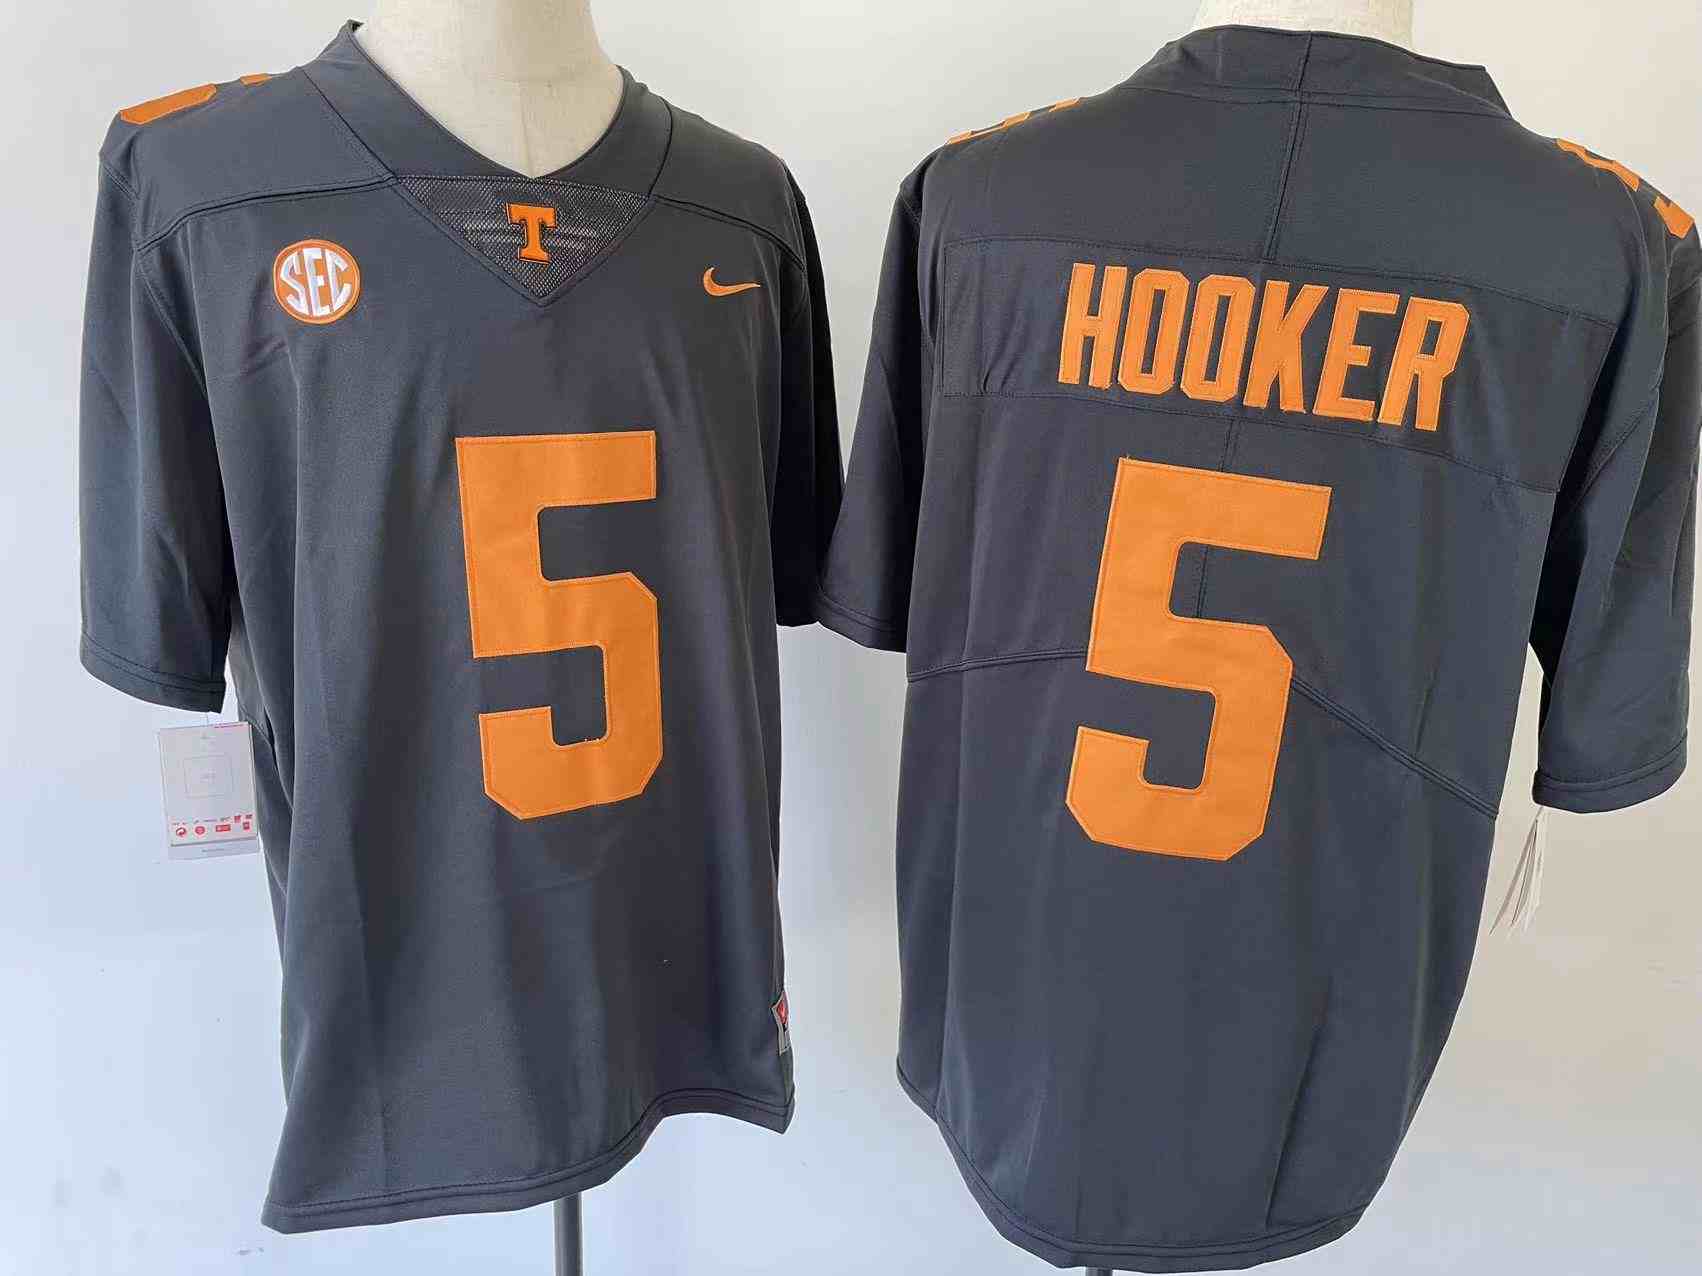 Youth Tennessee Volunteers Black #5 HOOKER College Football Jersey